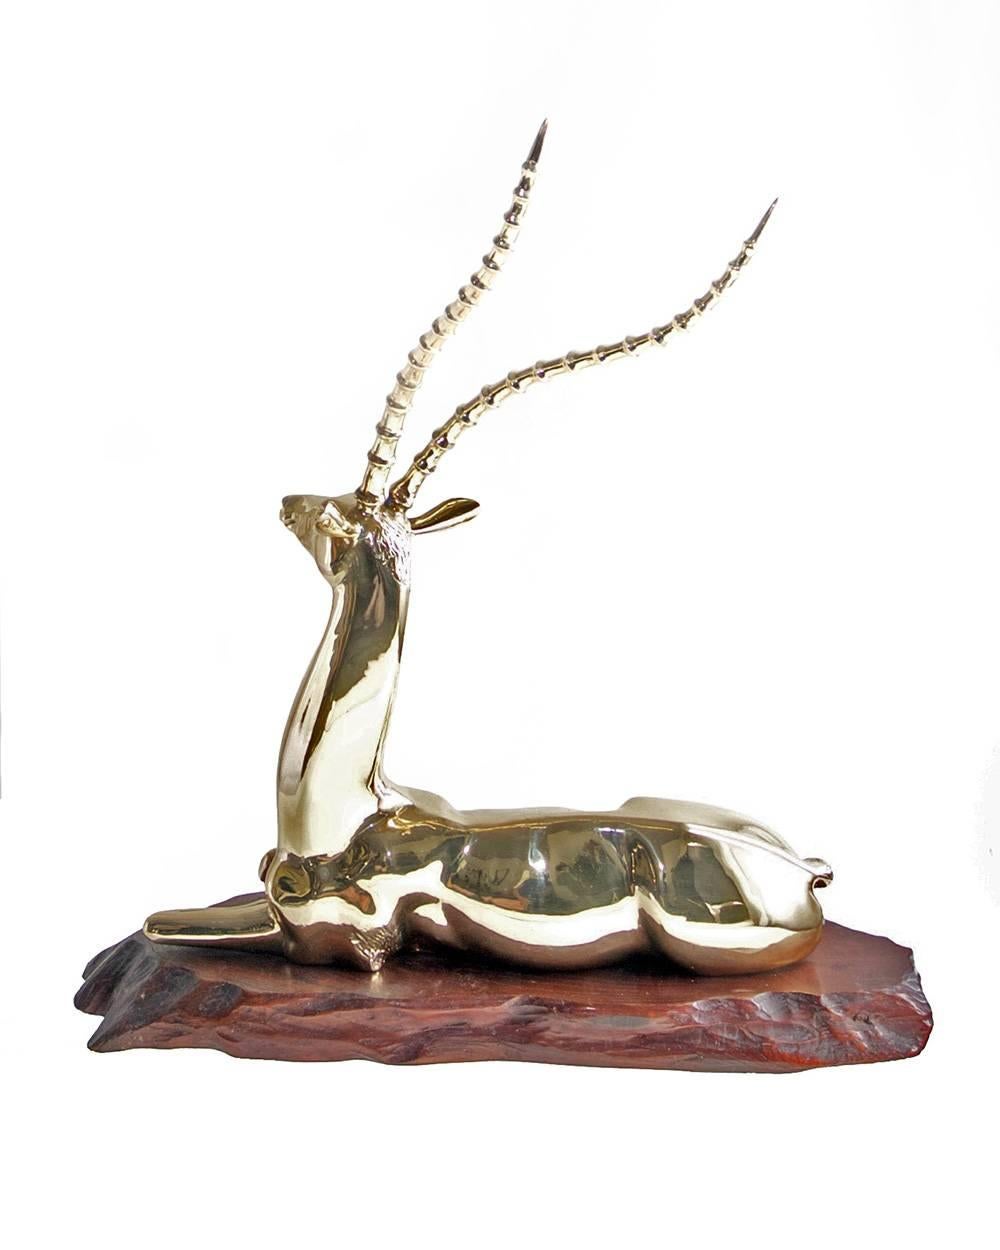 This large brass sculpture of a recumbent impala is presented on a separate natural edge wood base. It makes a terrific centrepiece on either a console or coffee table. At 21 inches high and 21 inches long, it provides a substantial impact in your